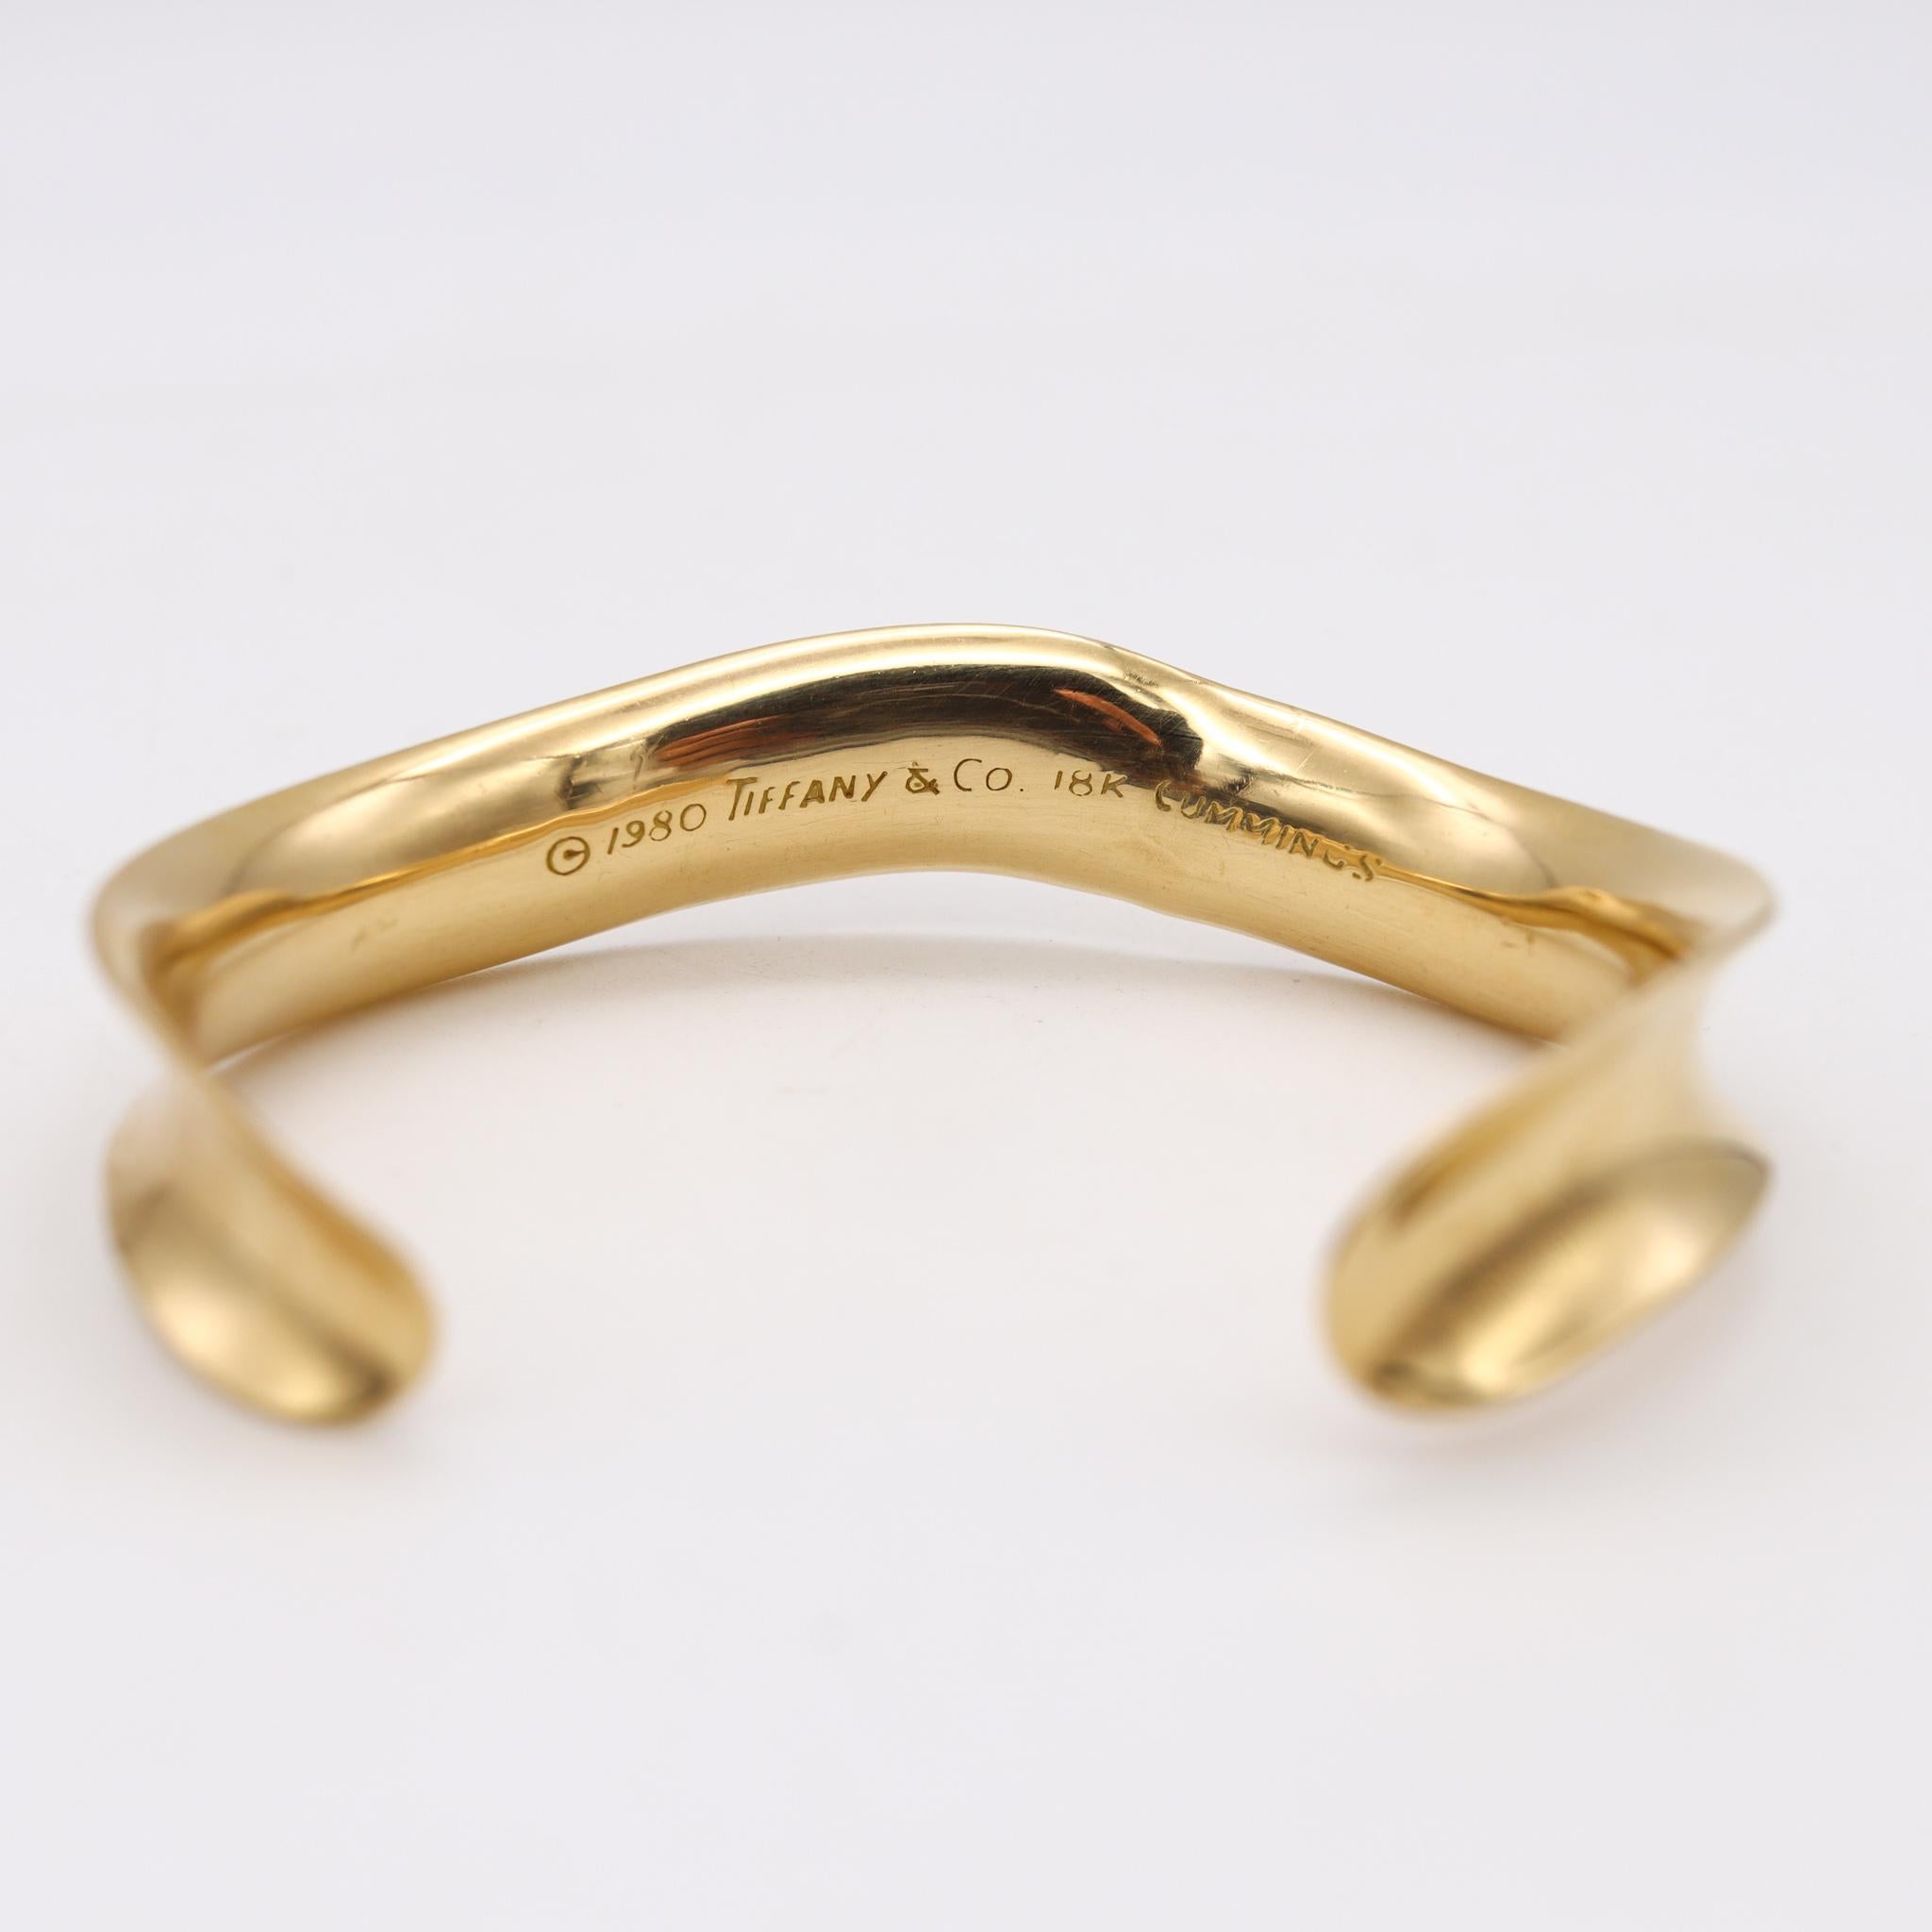 Tiffany & Co 1980 Angela Cummings Wave Cuff Bracelet In Solid 18Kt Yellow Gold For Sale 2